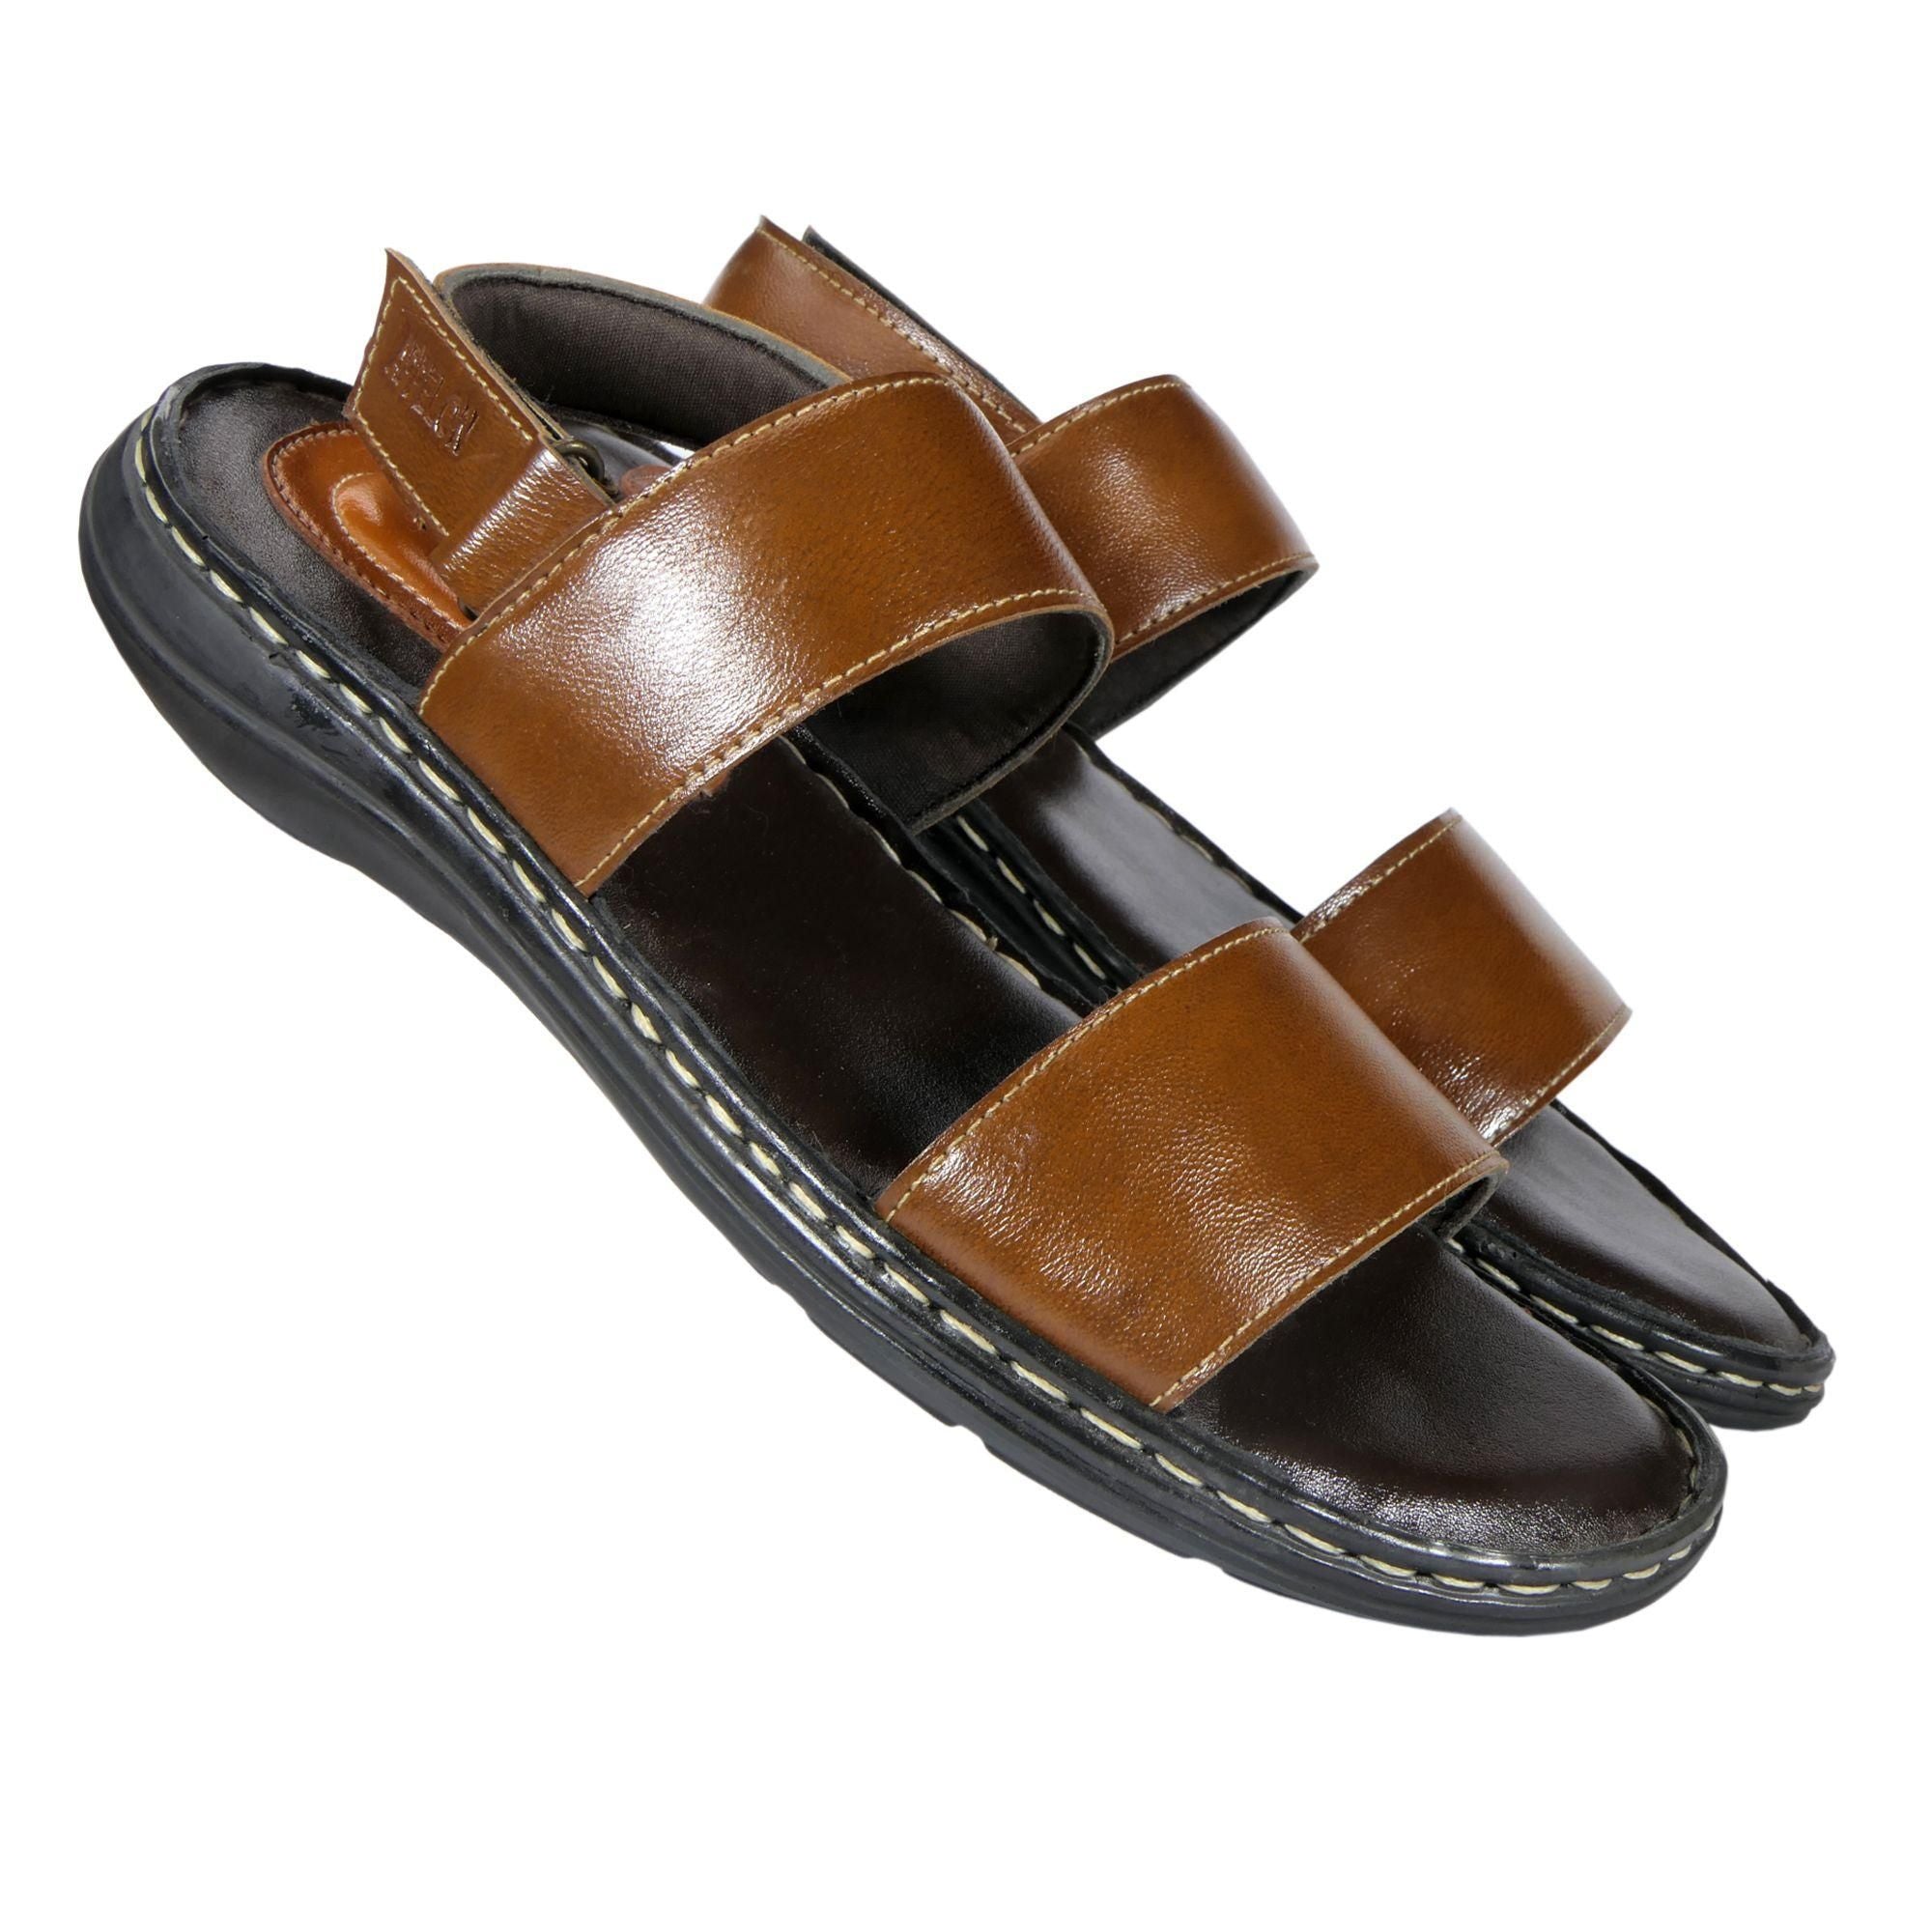 "StrideEase" Men's Leather Sandals